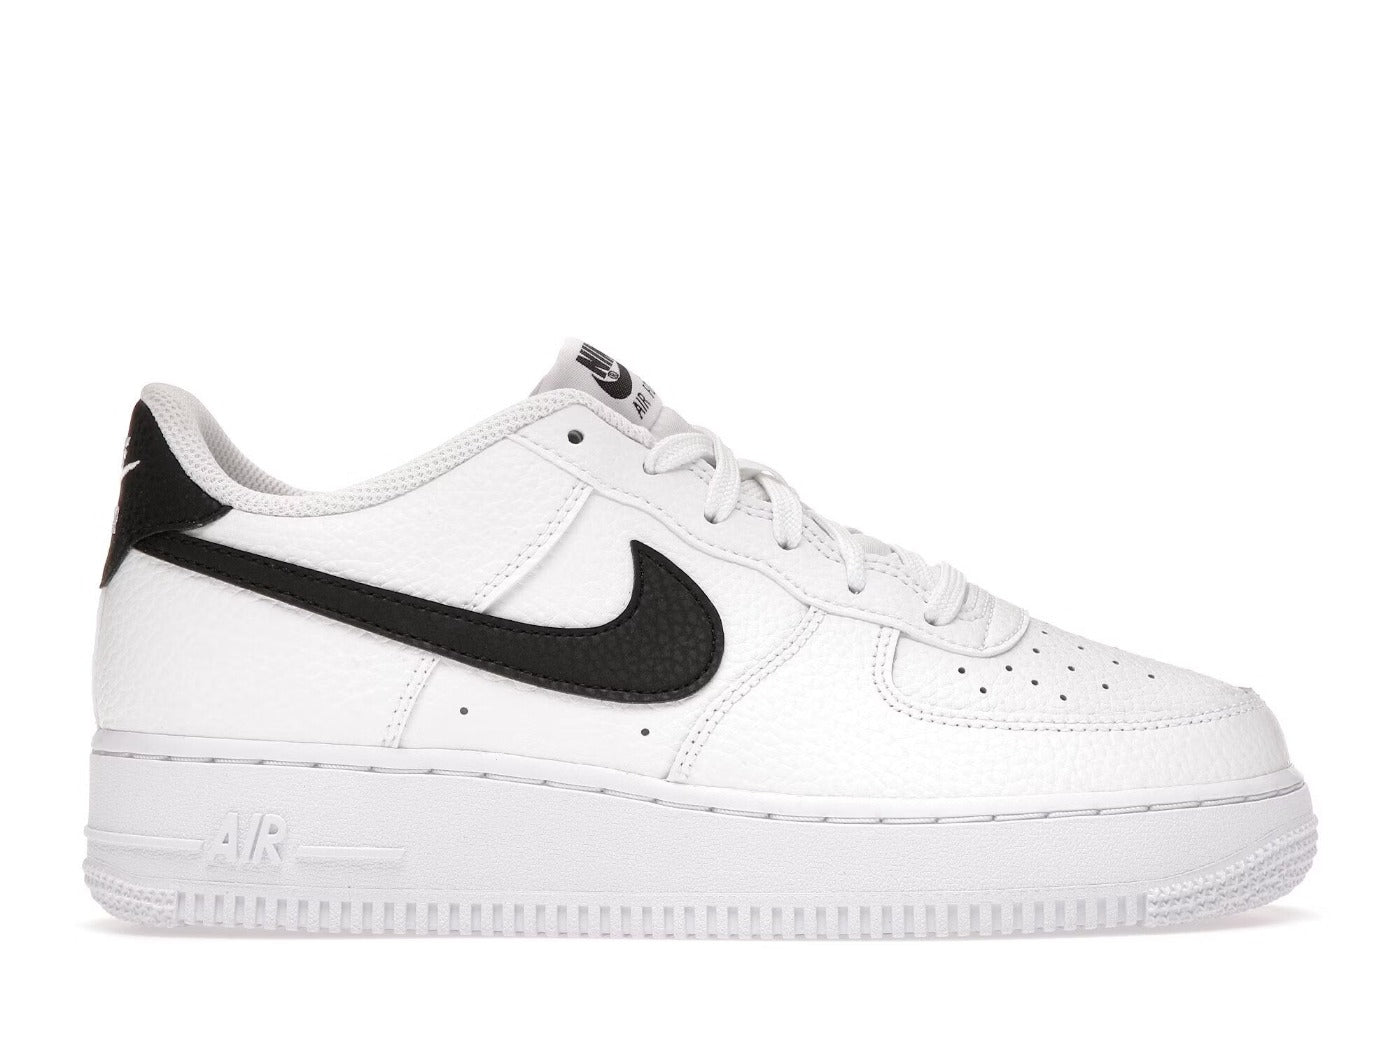 Nike Air Force 1 Low Black White Gs